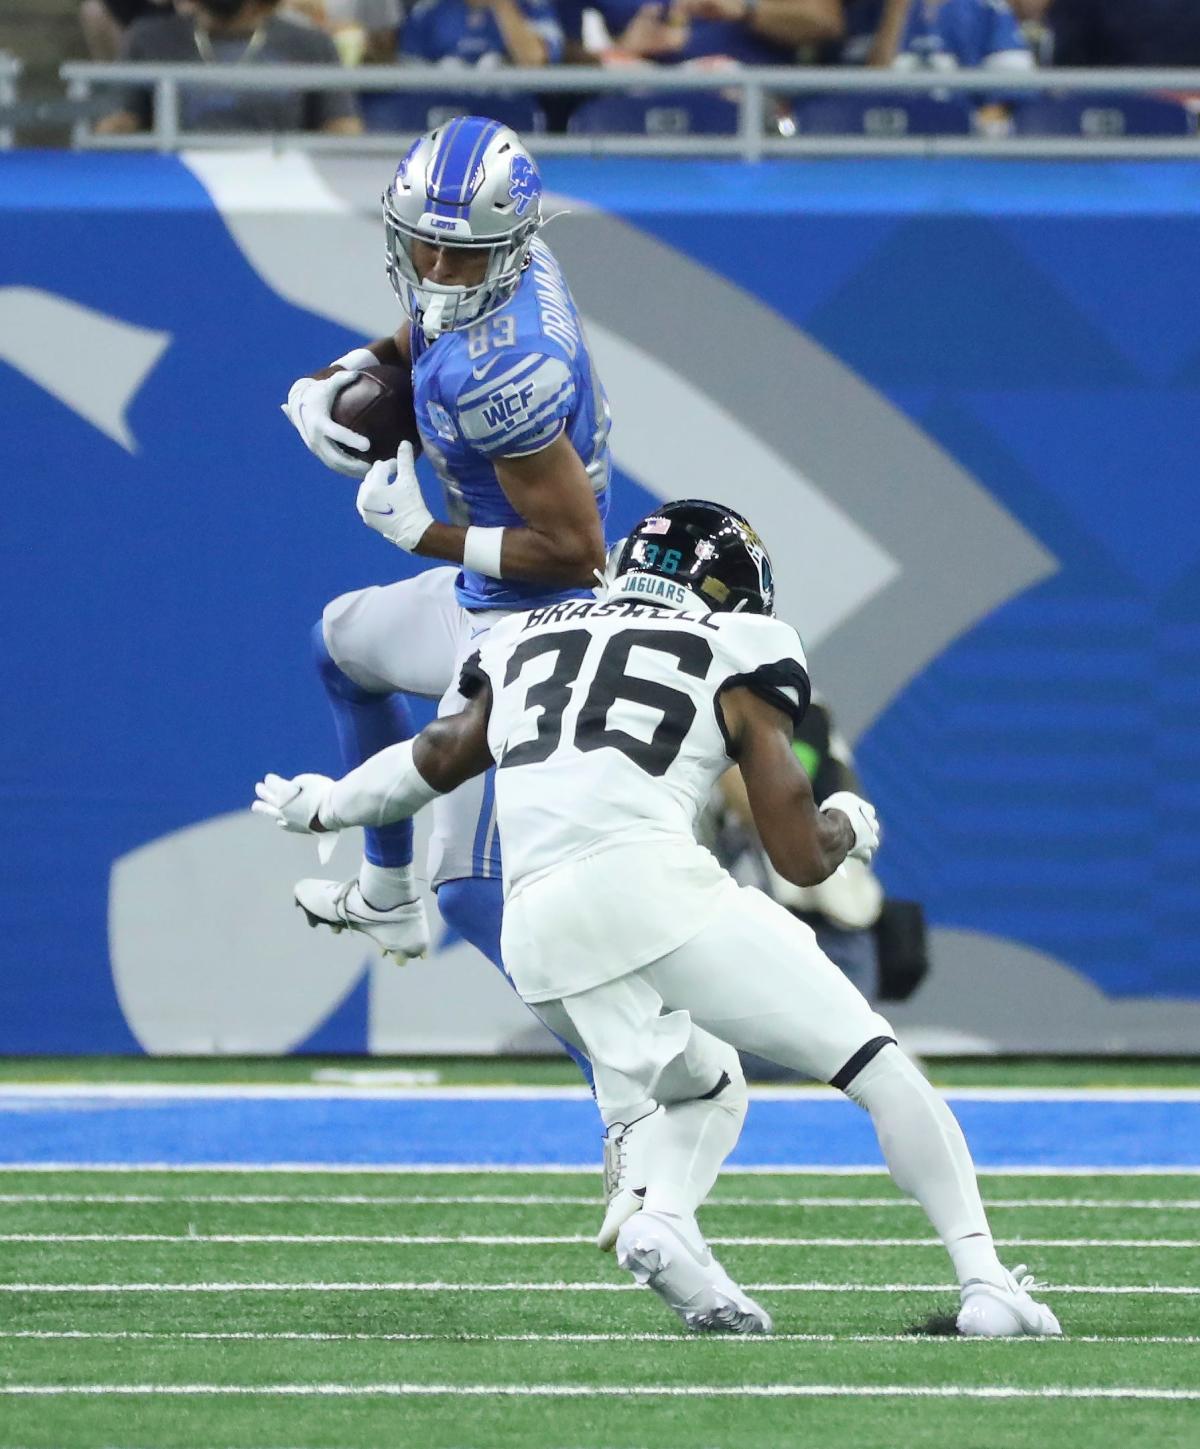 2021 NFL schedule release report tracker: Detroit Lions to again